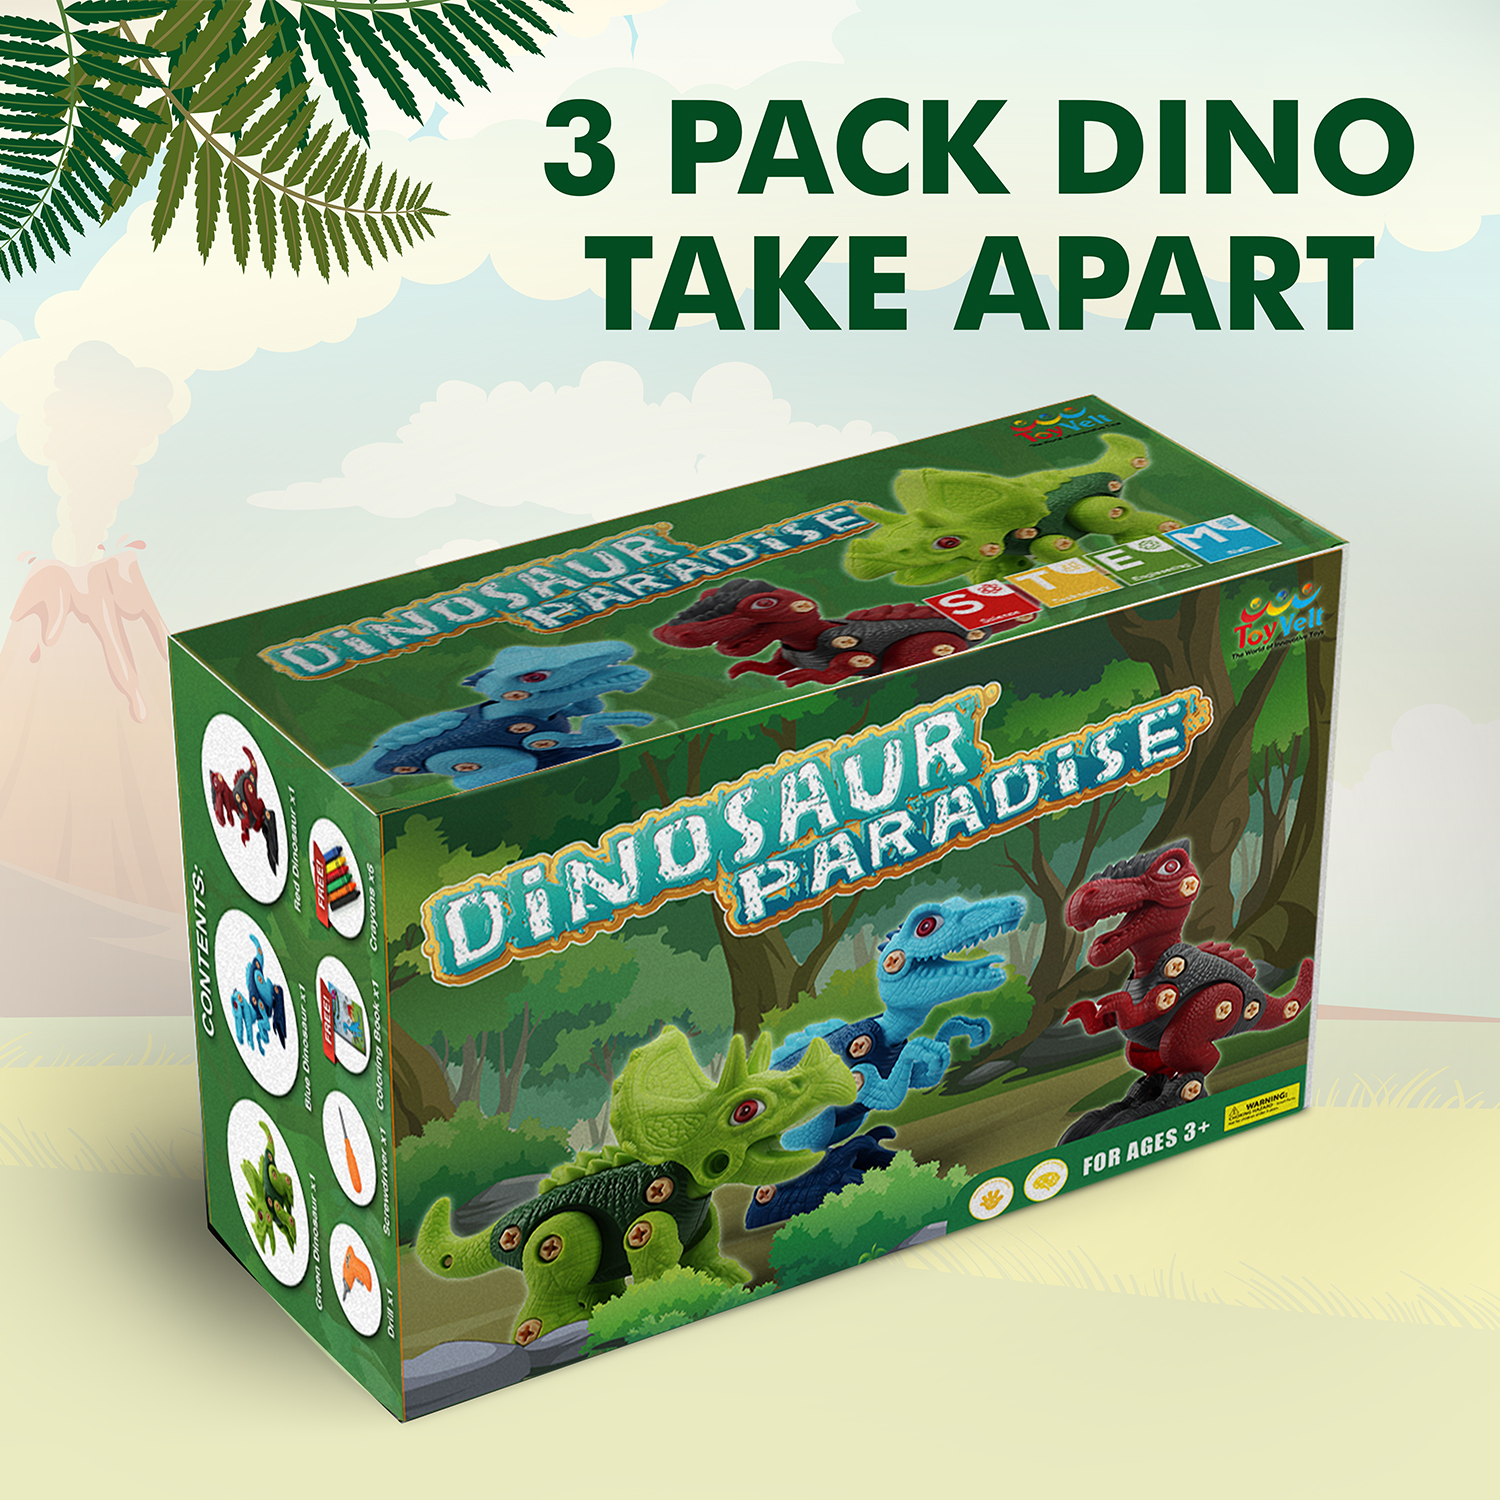 ToyVelt Dinosaur Take Apart Stem Toys for Boys & Girls Age 3 - 12 years old - Pack of 3 huge Dinosaurs, With Electric Drill, Dinosaur Toys Christmas Birthday Gifts Boys Girls - image 2 of 8